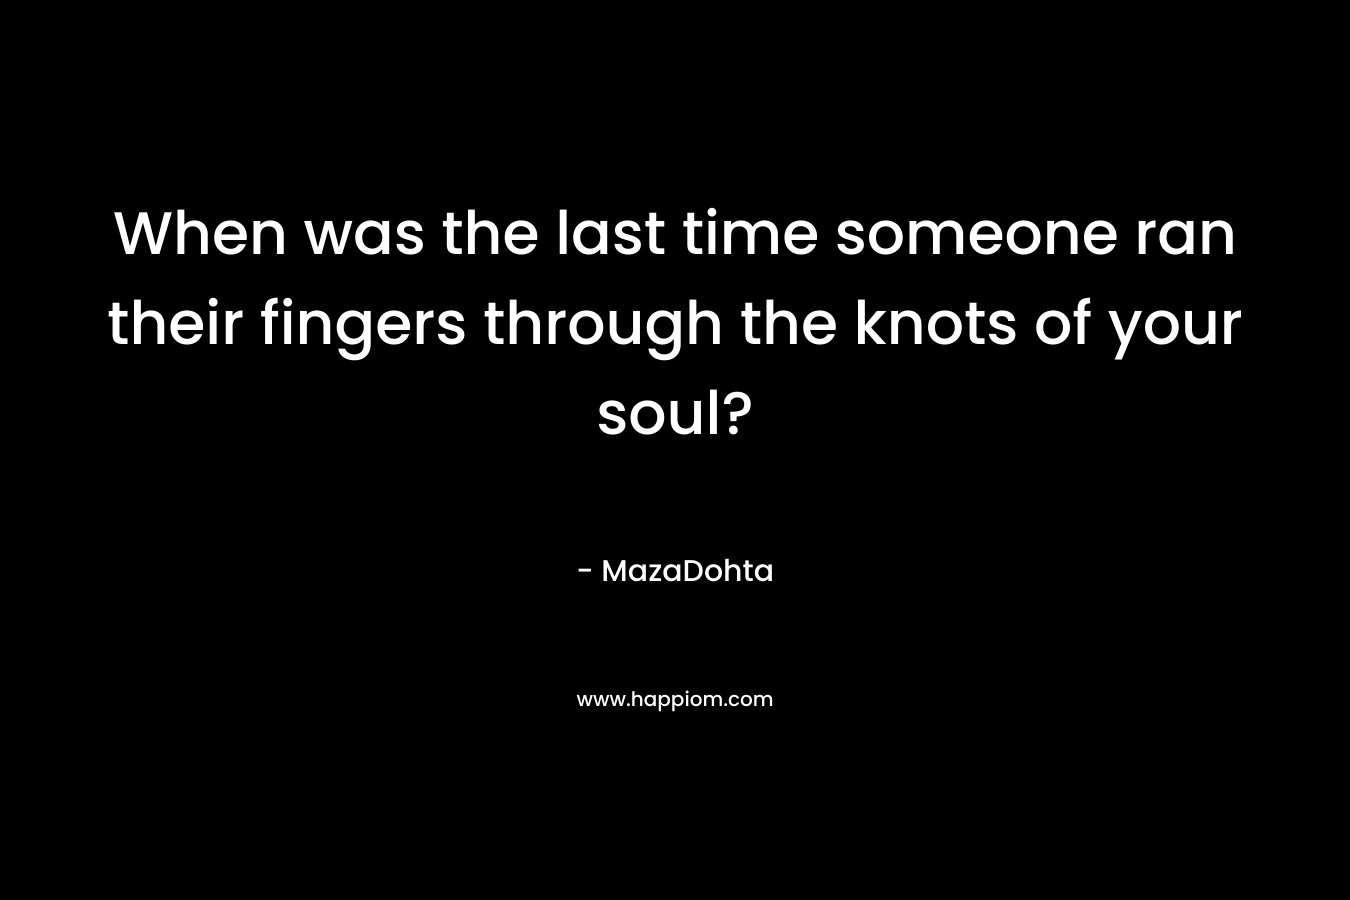 When was the last time someone ran their fingers through the knots of your soul? – MazaDohta